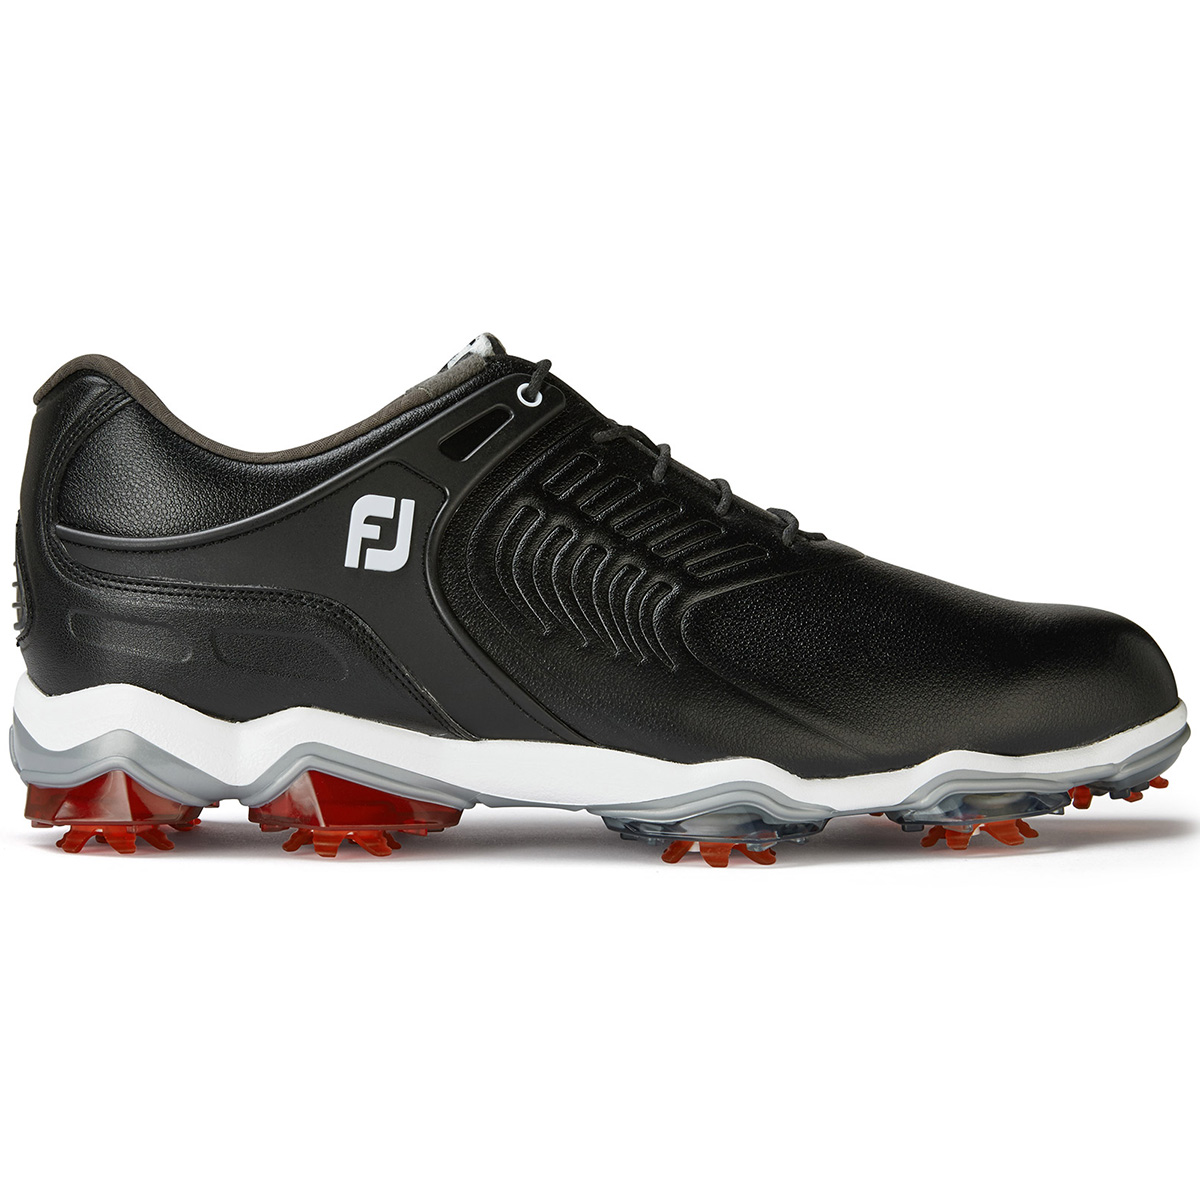 FootJoy Tour S Shoes from american golf